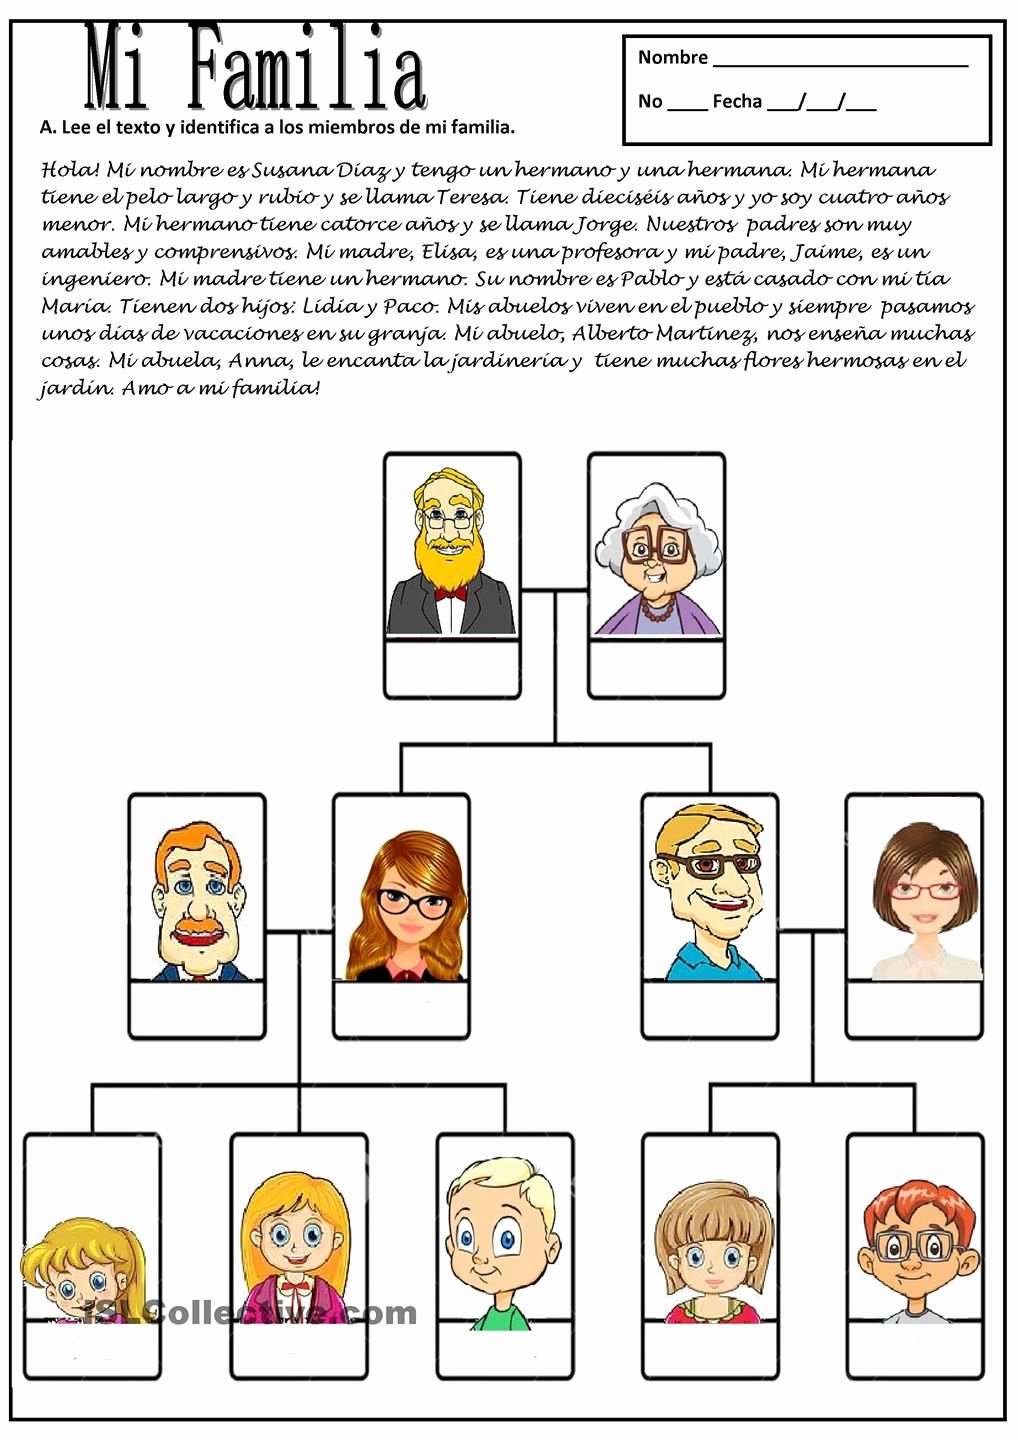 Spanish Essays About Family New Mi Familia This Would Be Fun to Do as An assessment for